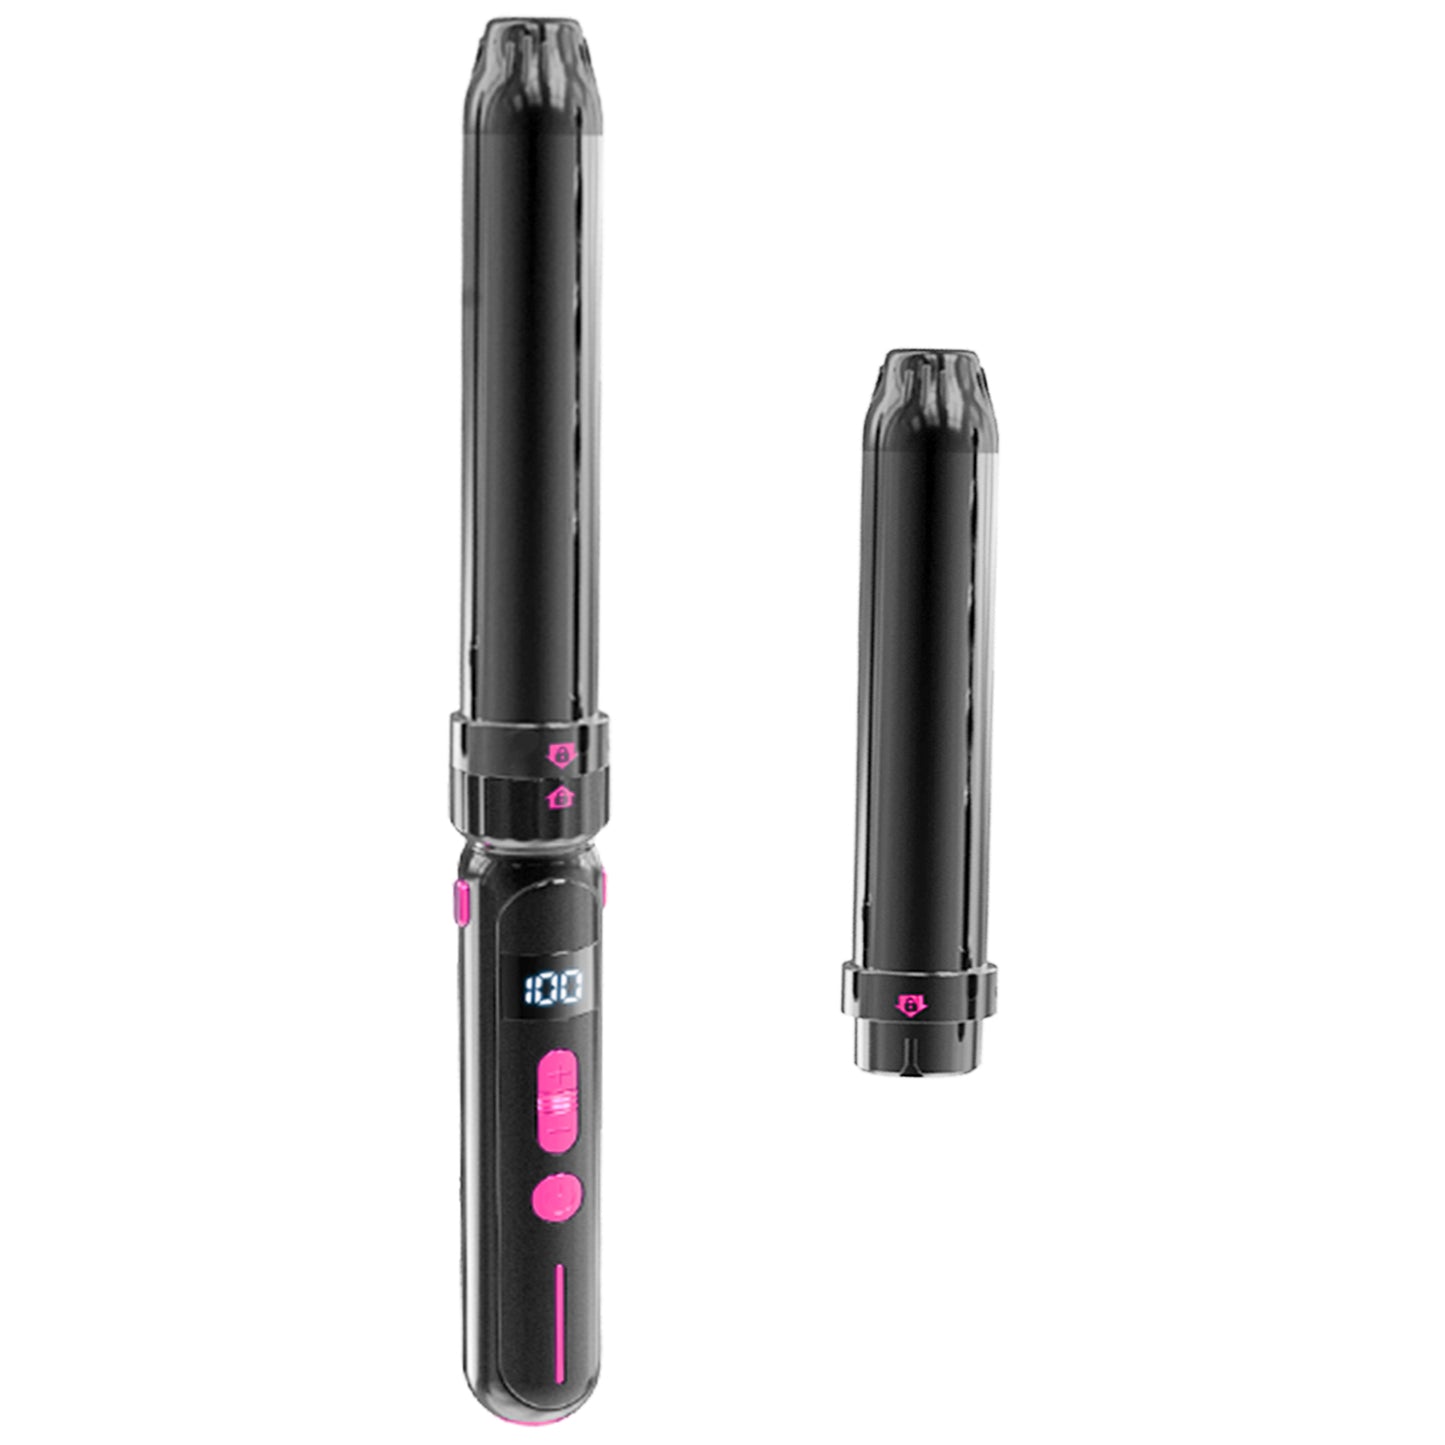 Curling Wand Set, Safety Against Scalding Easy To Use Curly Hair Sticks